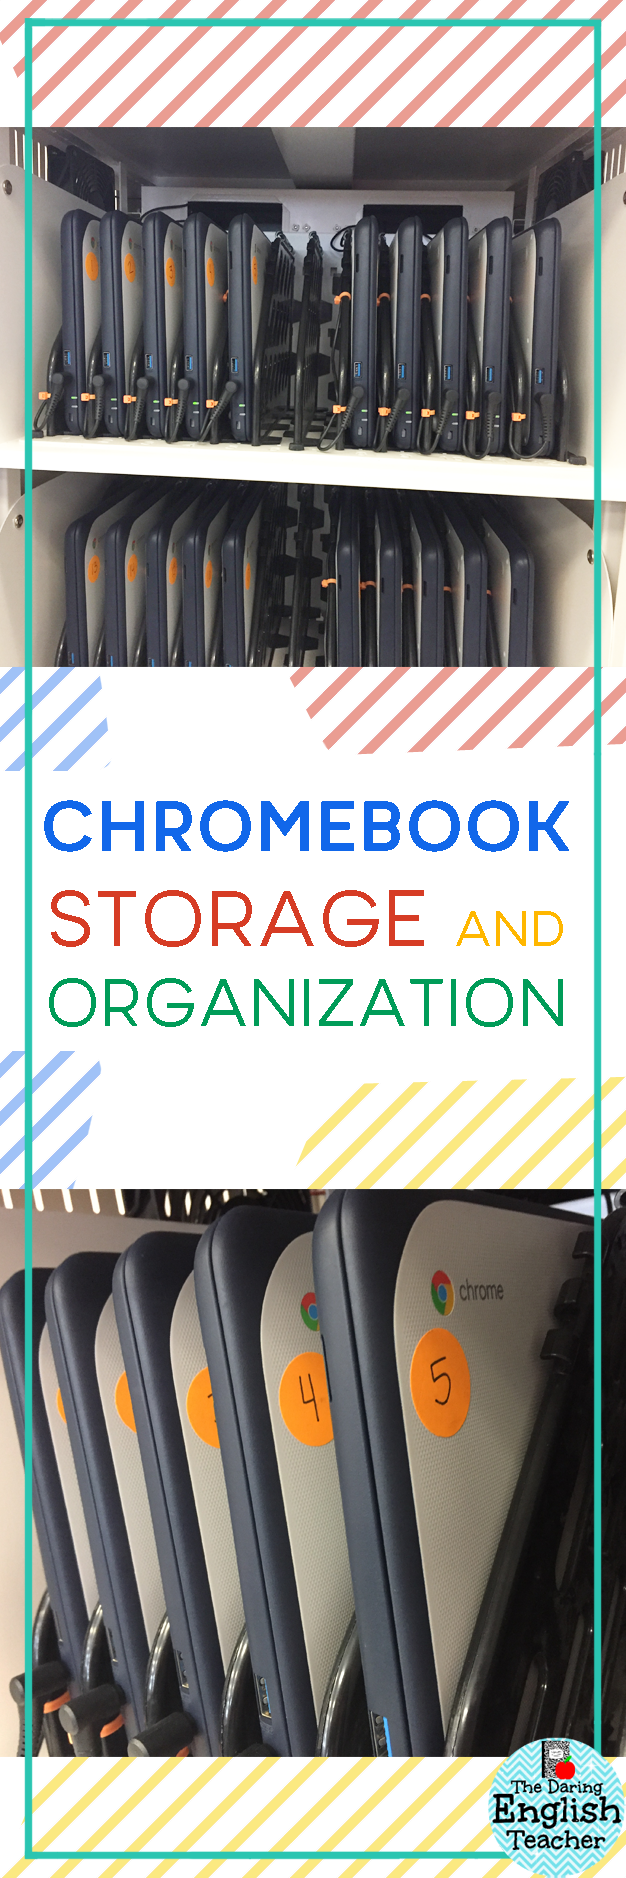 Storing and organizing Chromebook carts in the classroom.